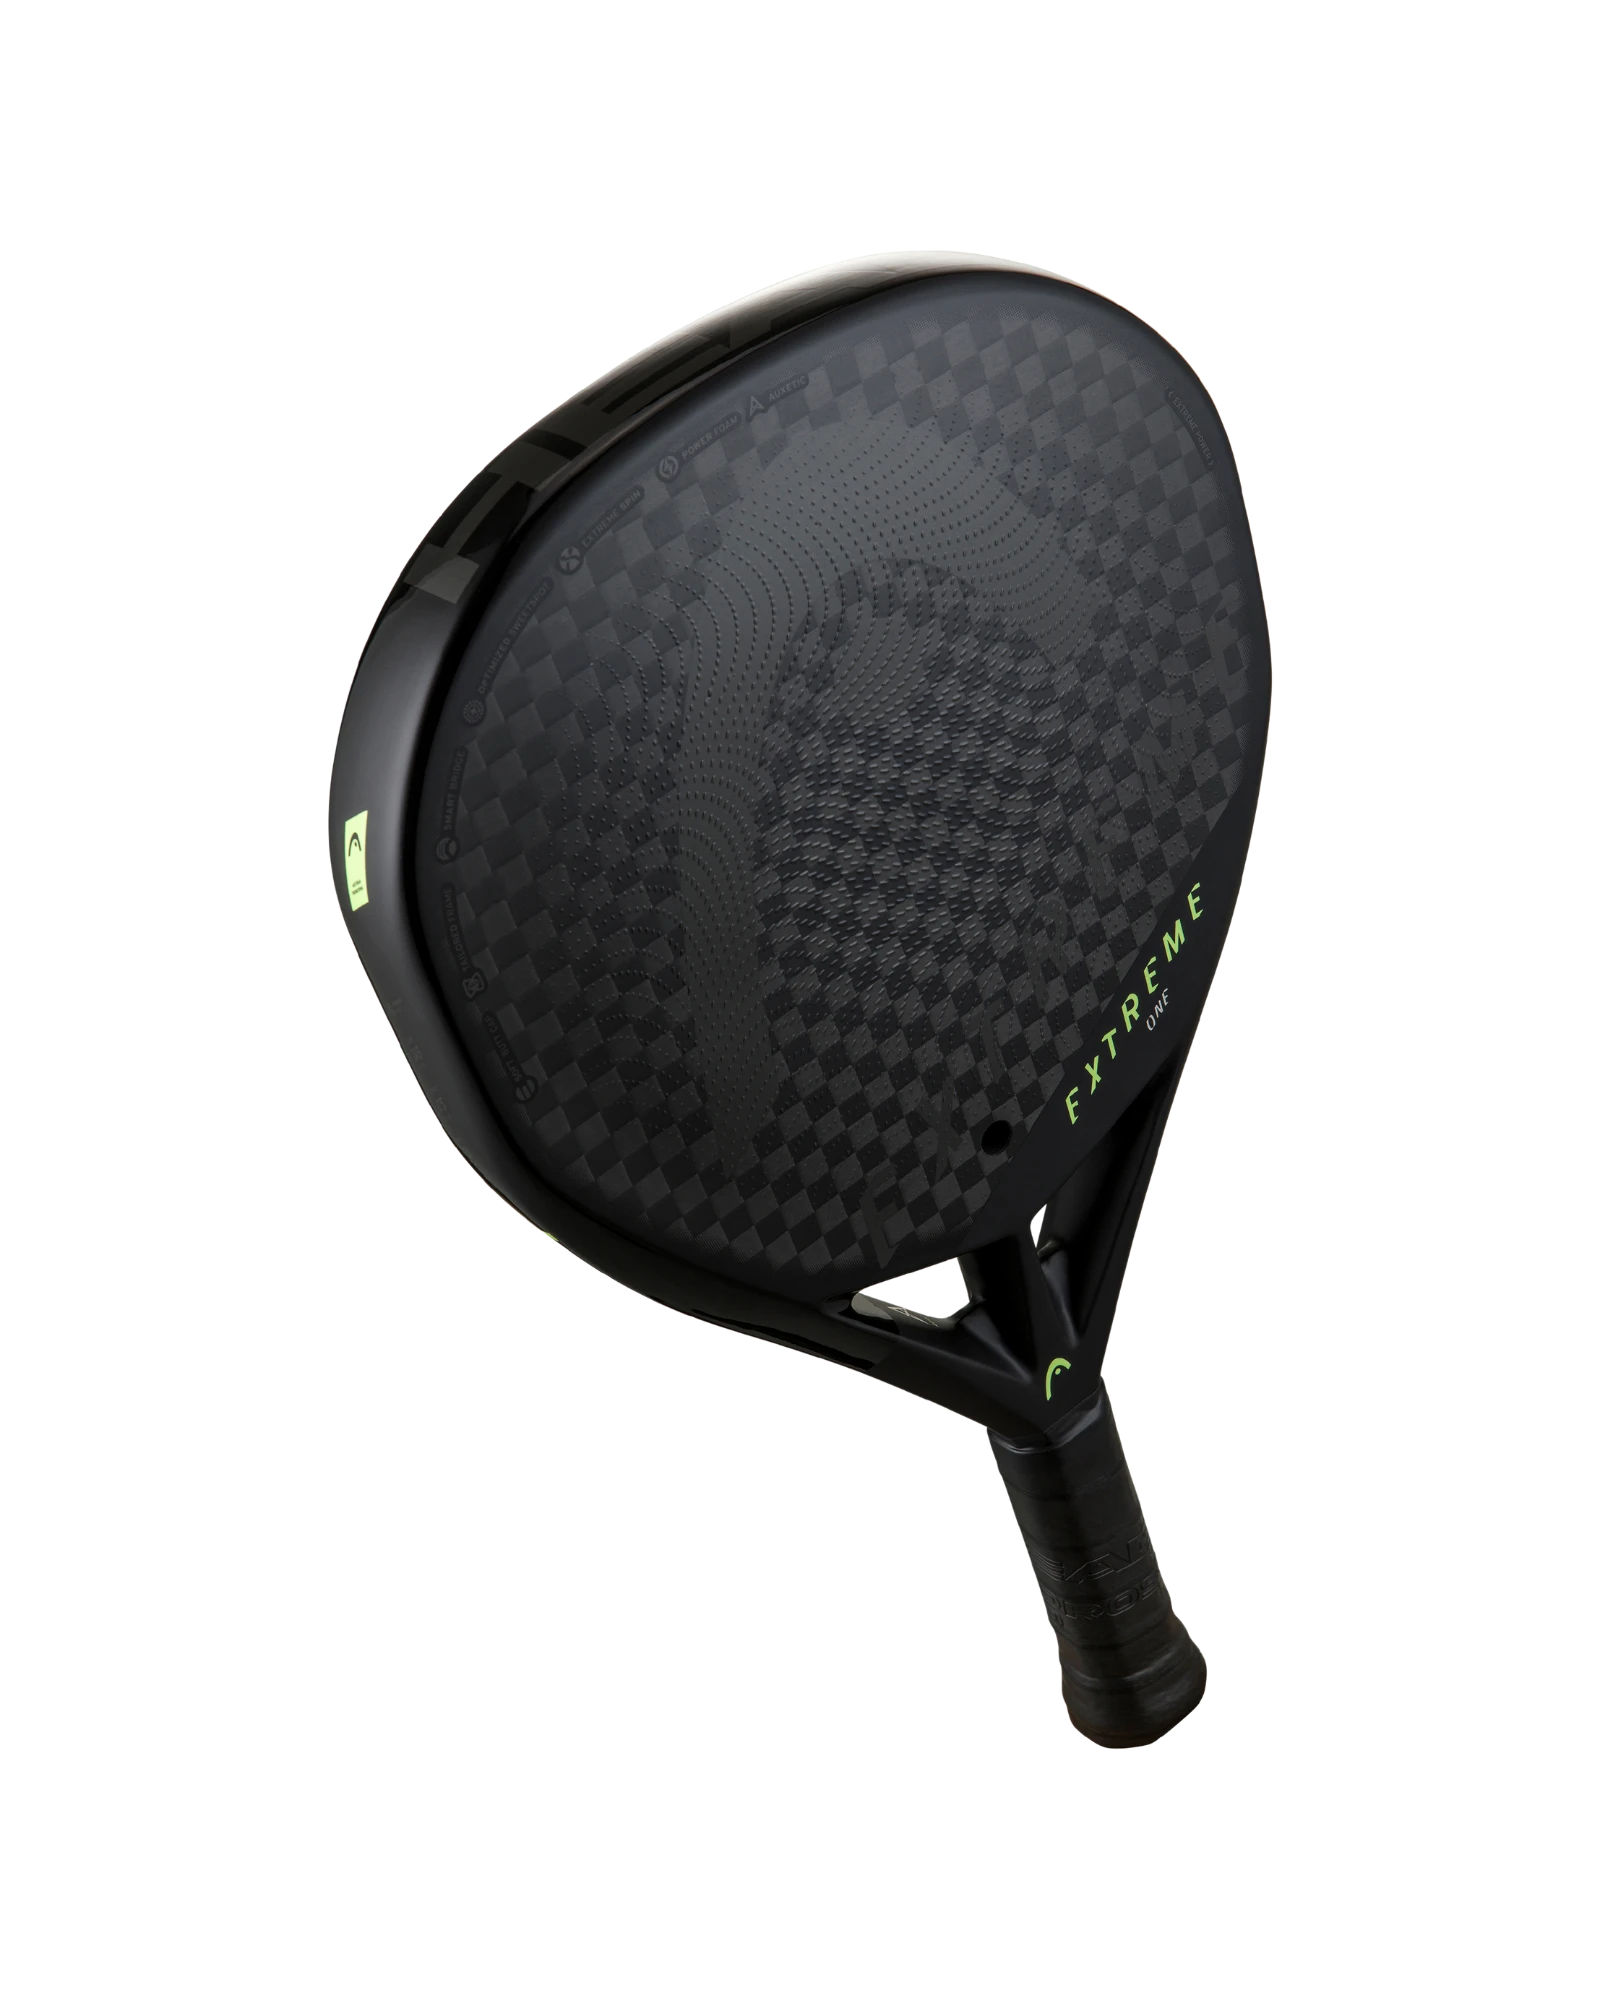 The Head Extreme One Padel Racket